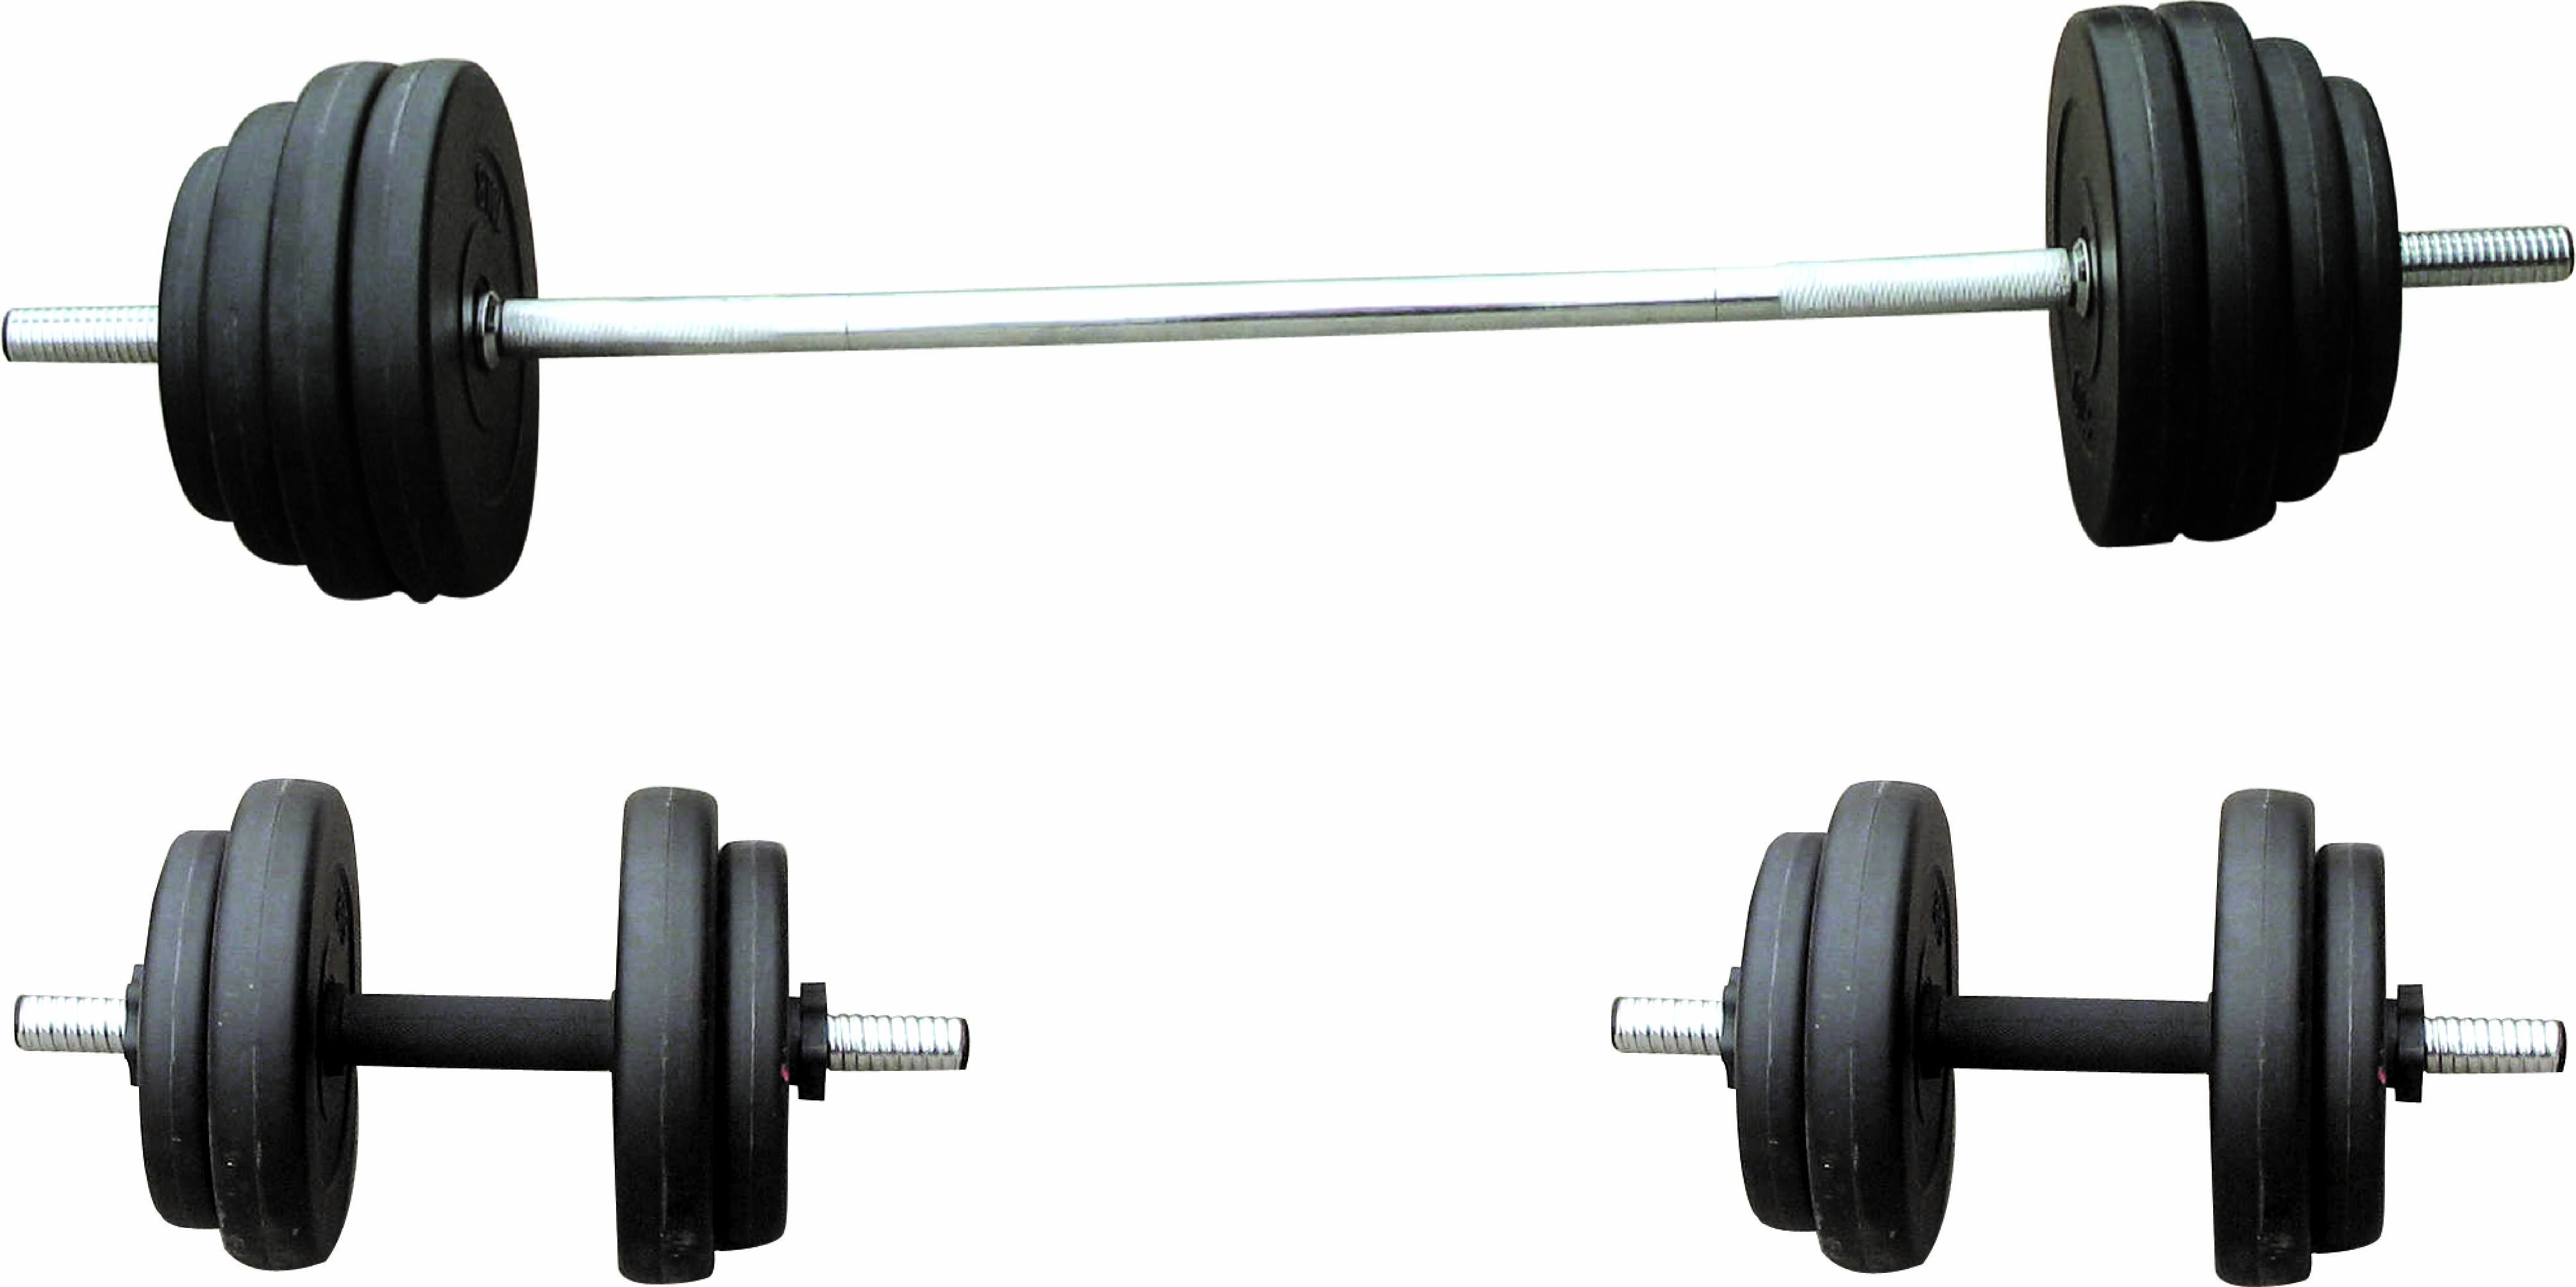 41 Images Of Barbell Images   You Can Use These Free Cliparts For Your